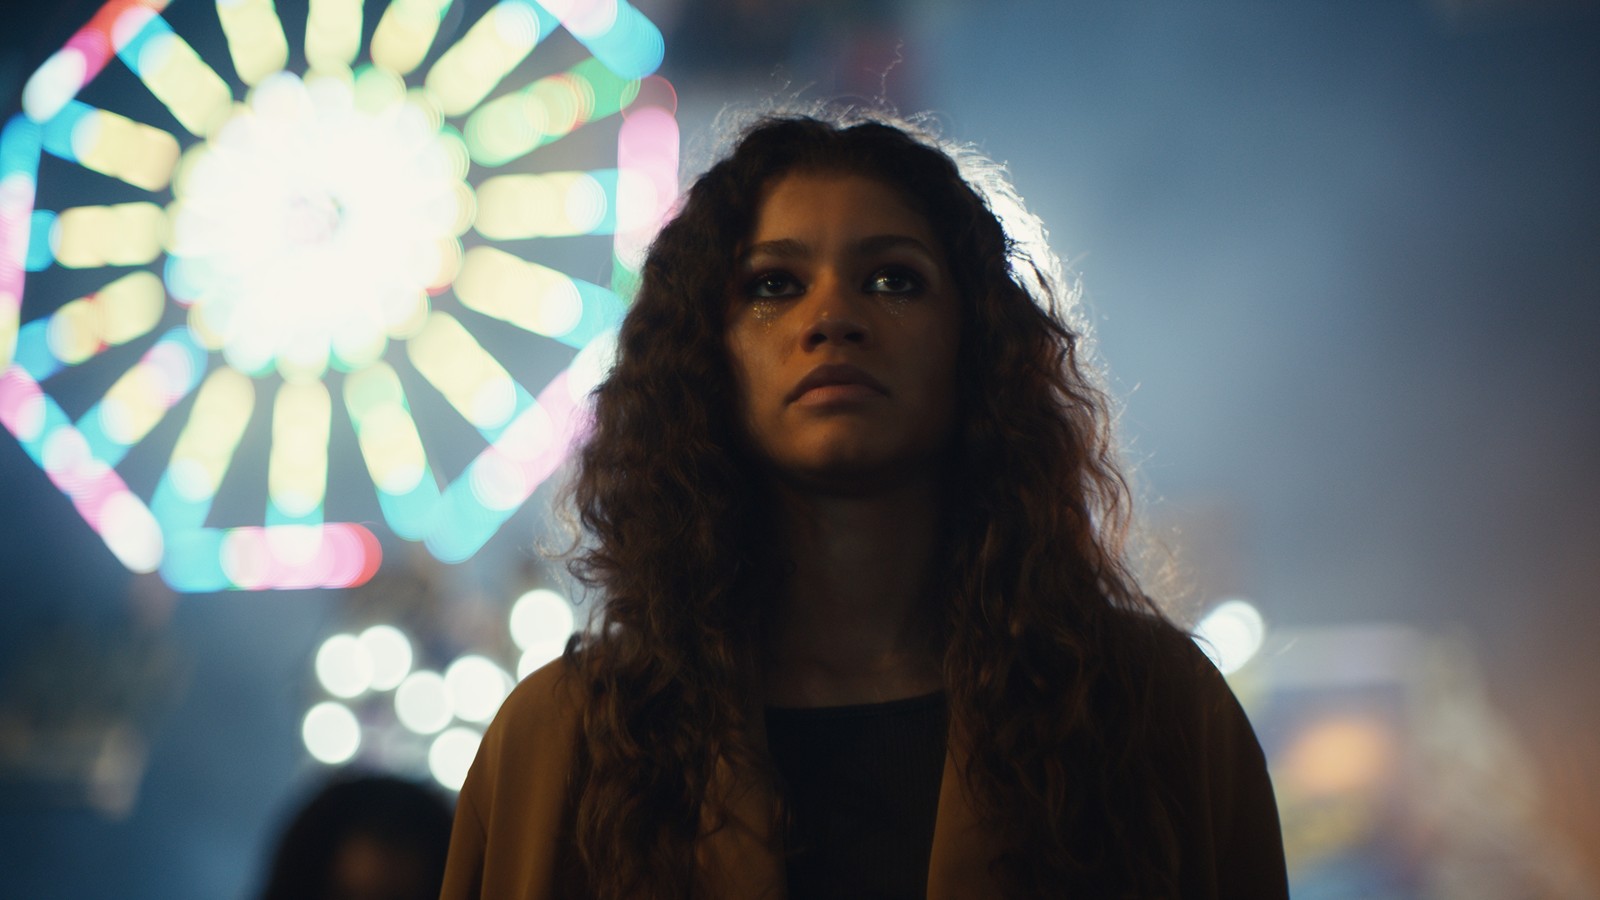 Teen Girls Love Huge Cocks - Does HBO's 'Euphoria' Merit the Moral Panic?: Review - The Atlantic